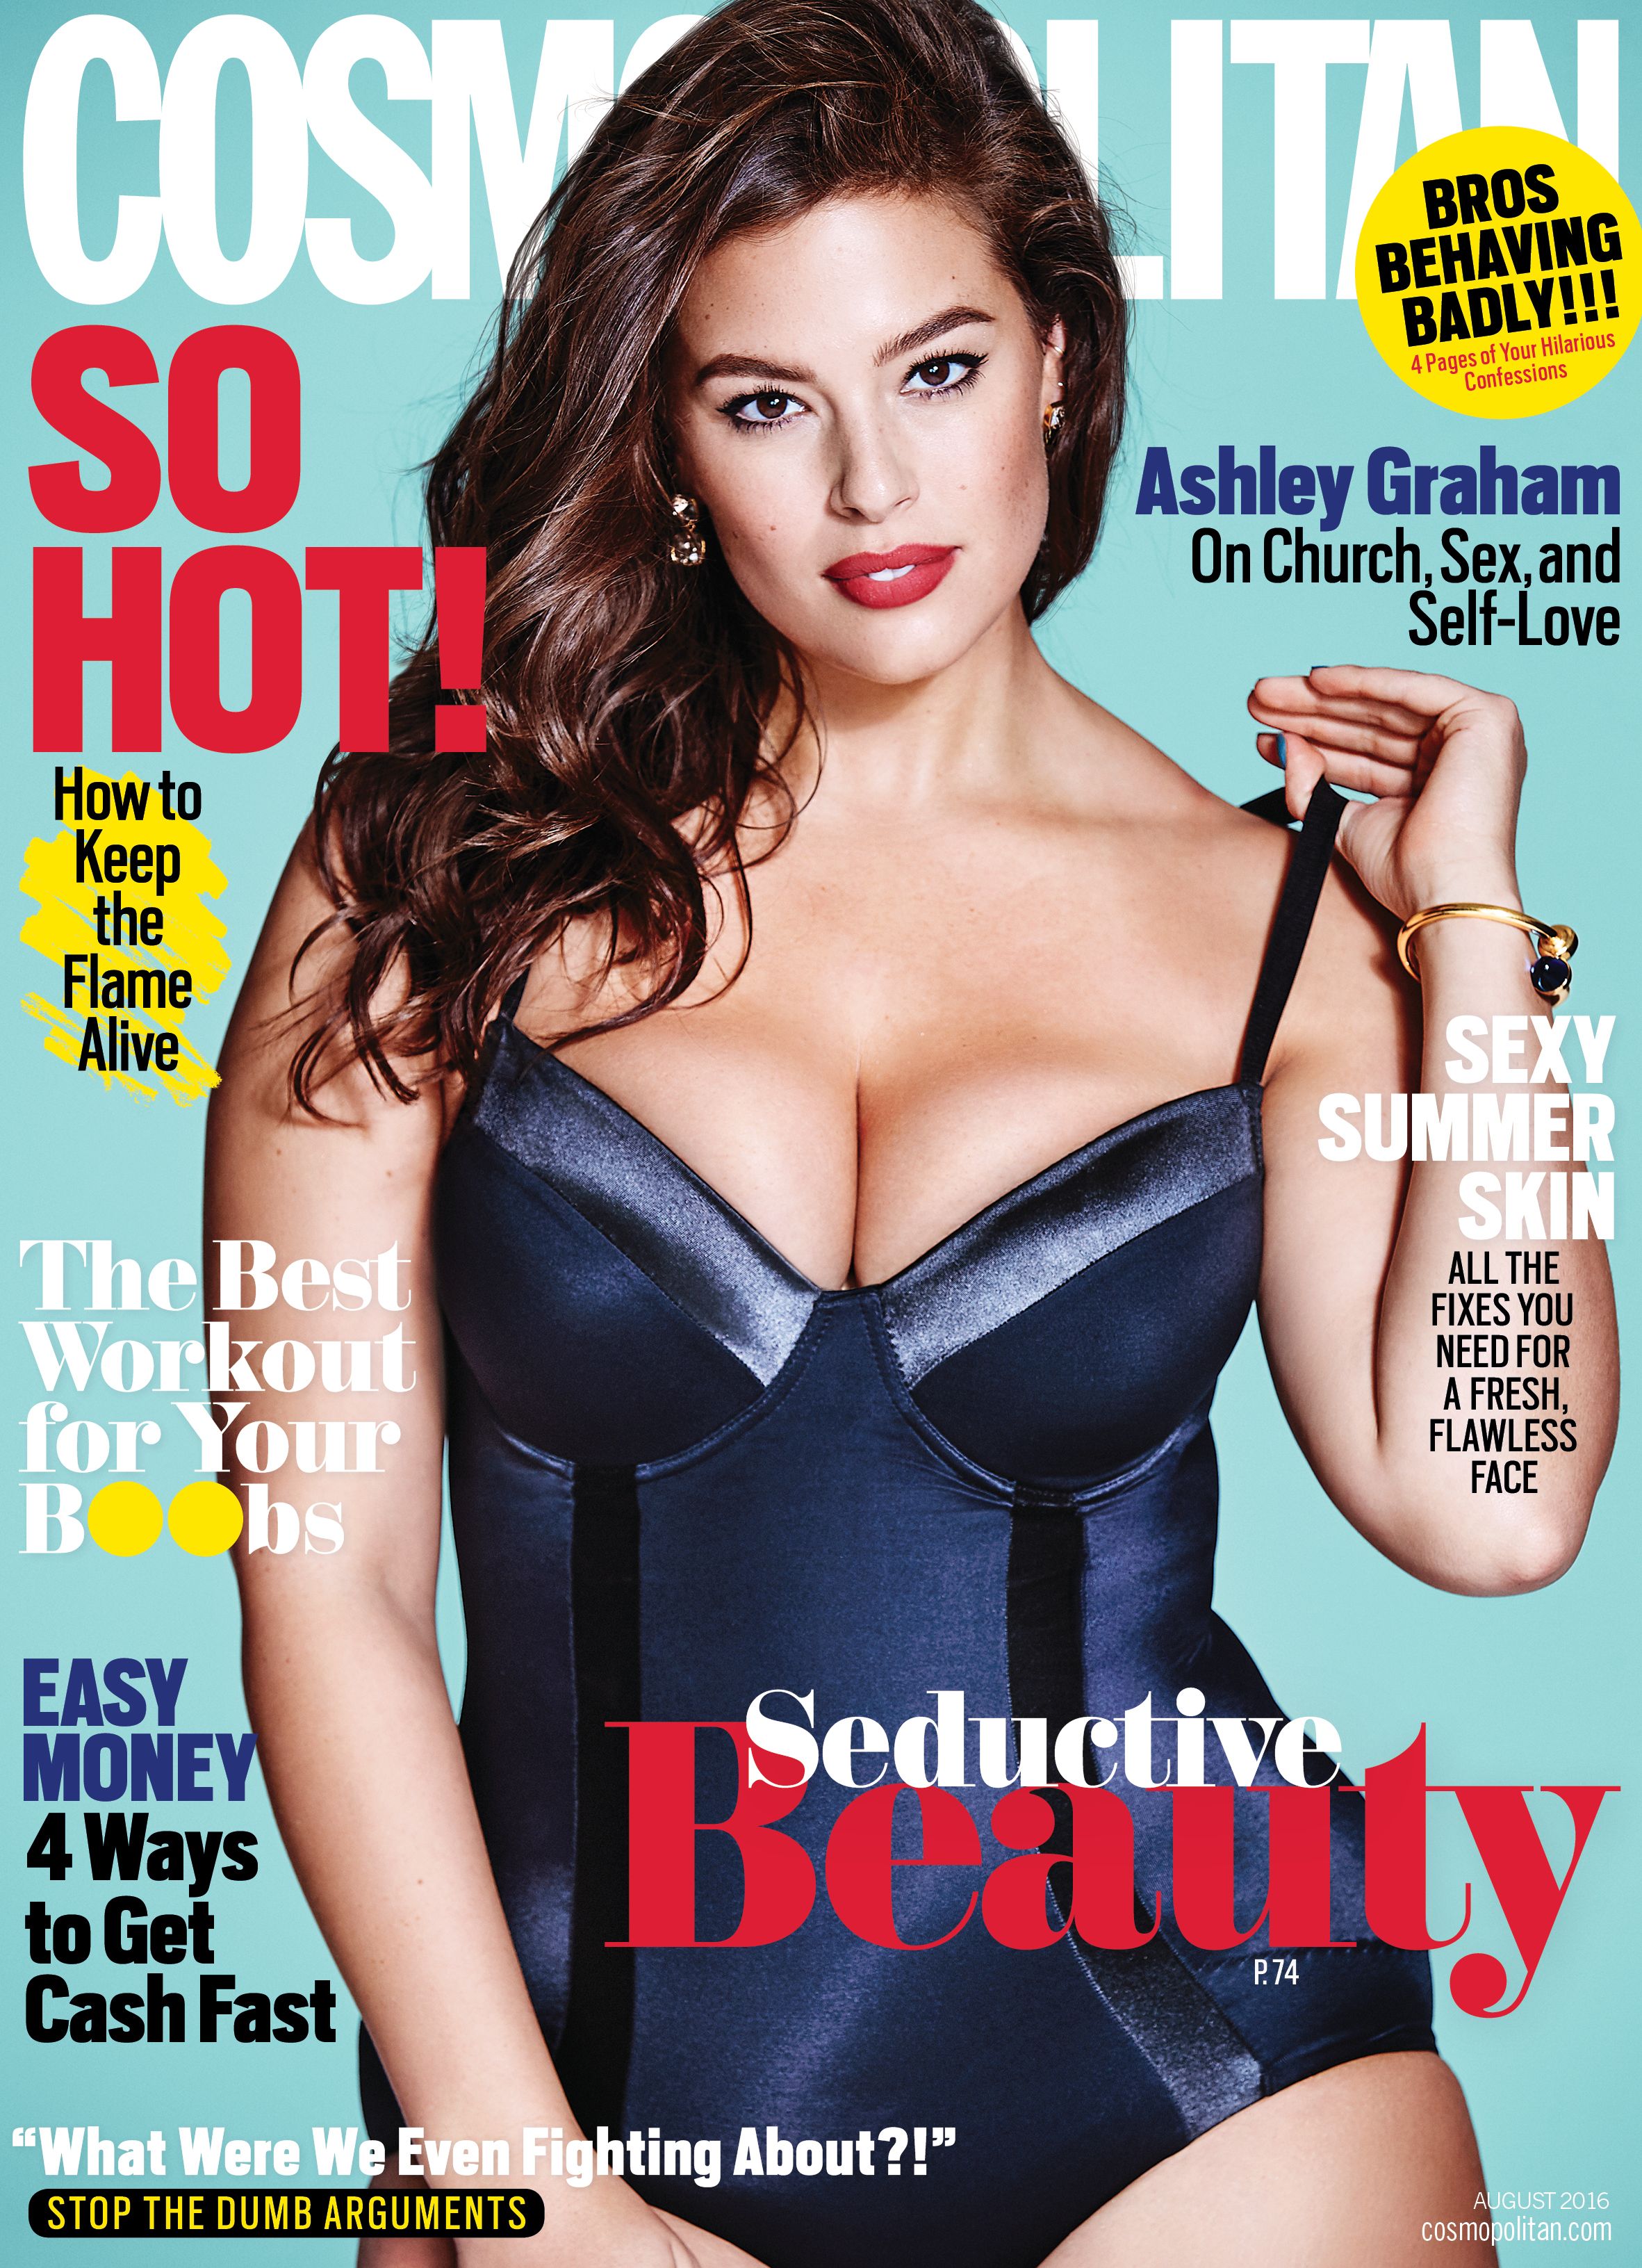 Amy Schumer Nude Fuck - Ashley Graham on August 2016 Cosmopolitan Cover - Cosmo Cover Stars